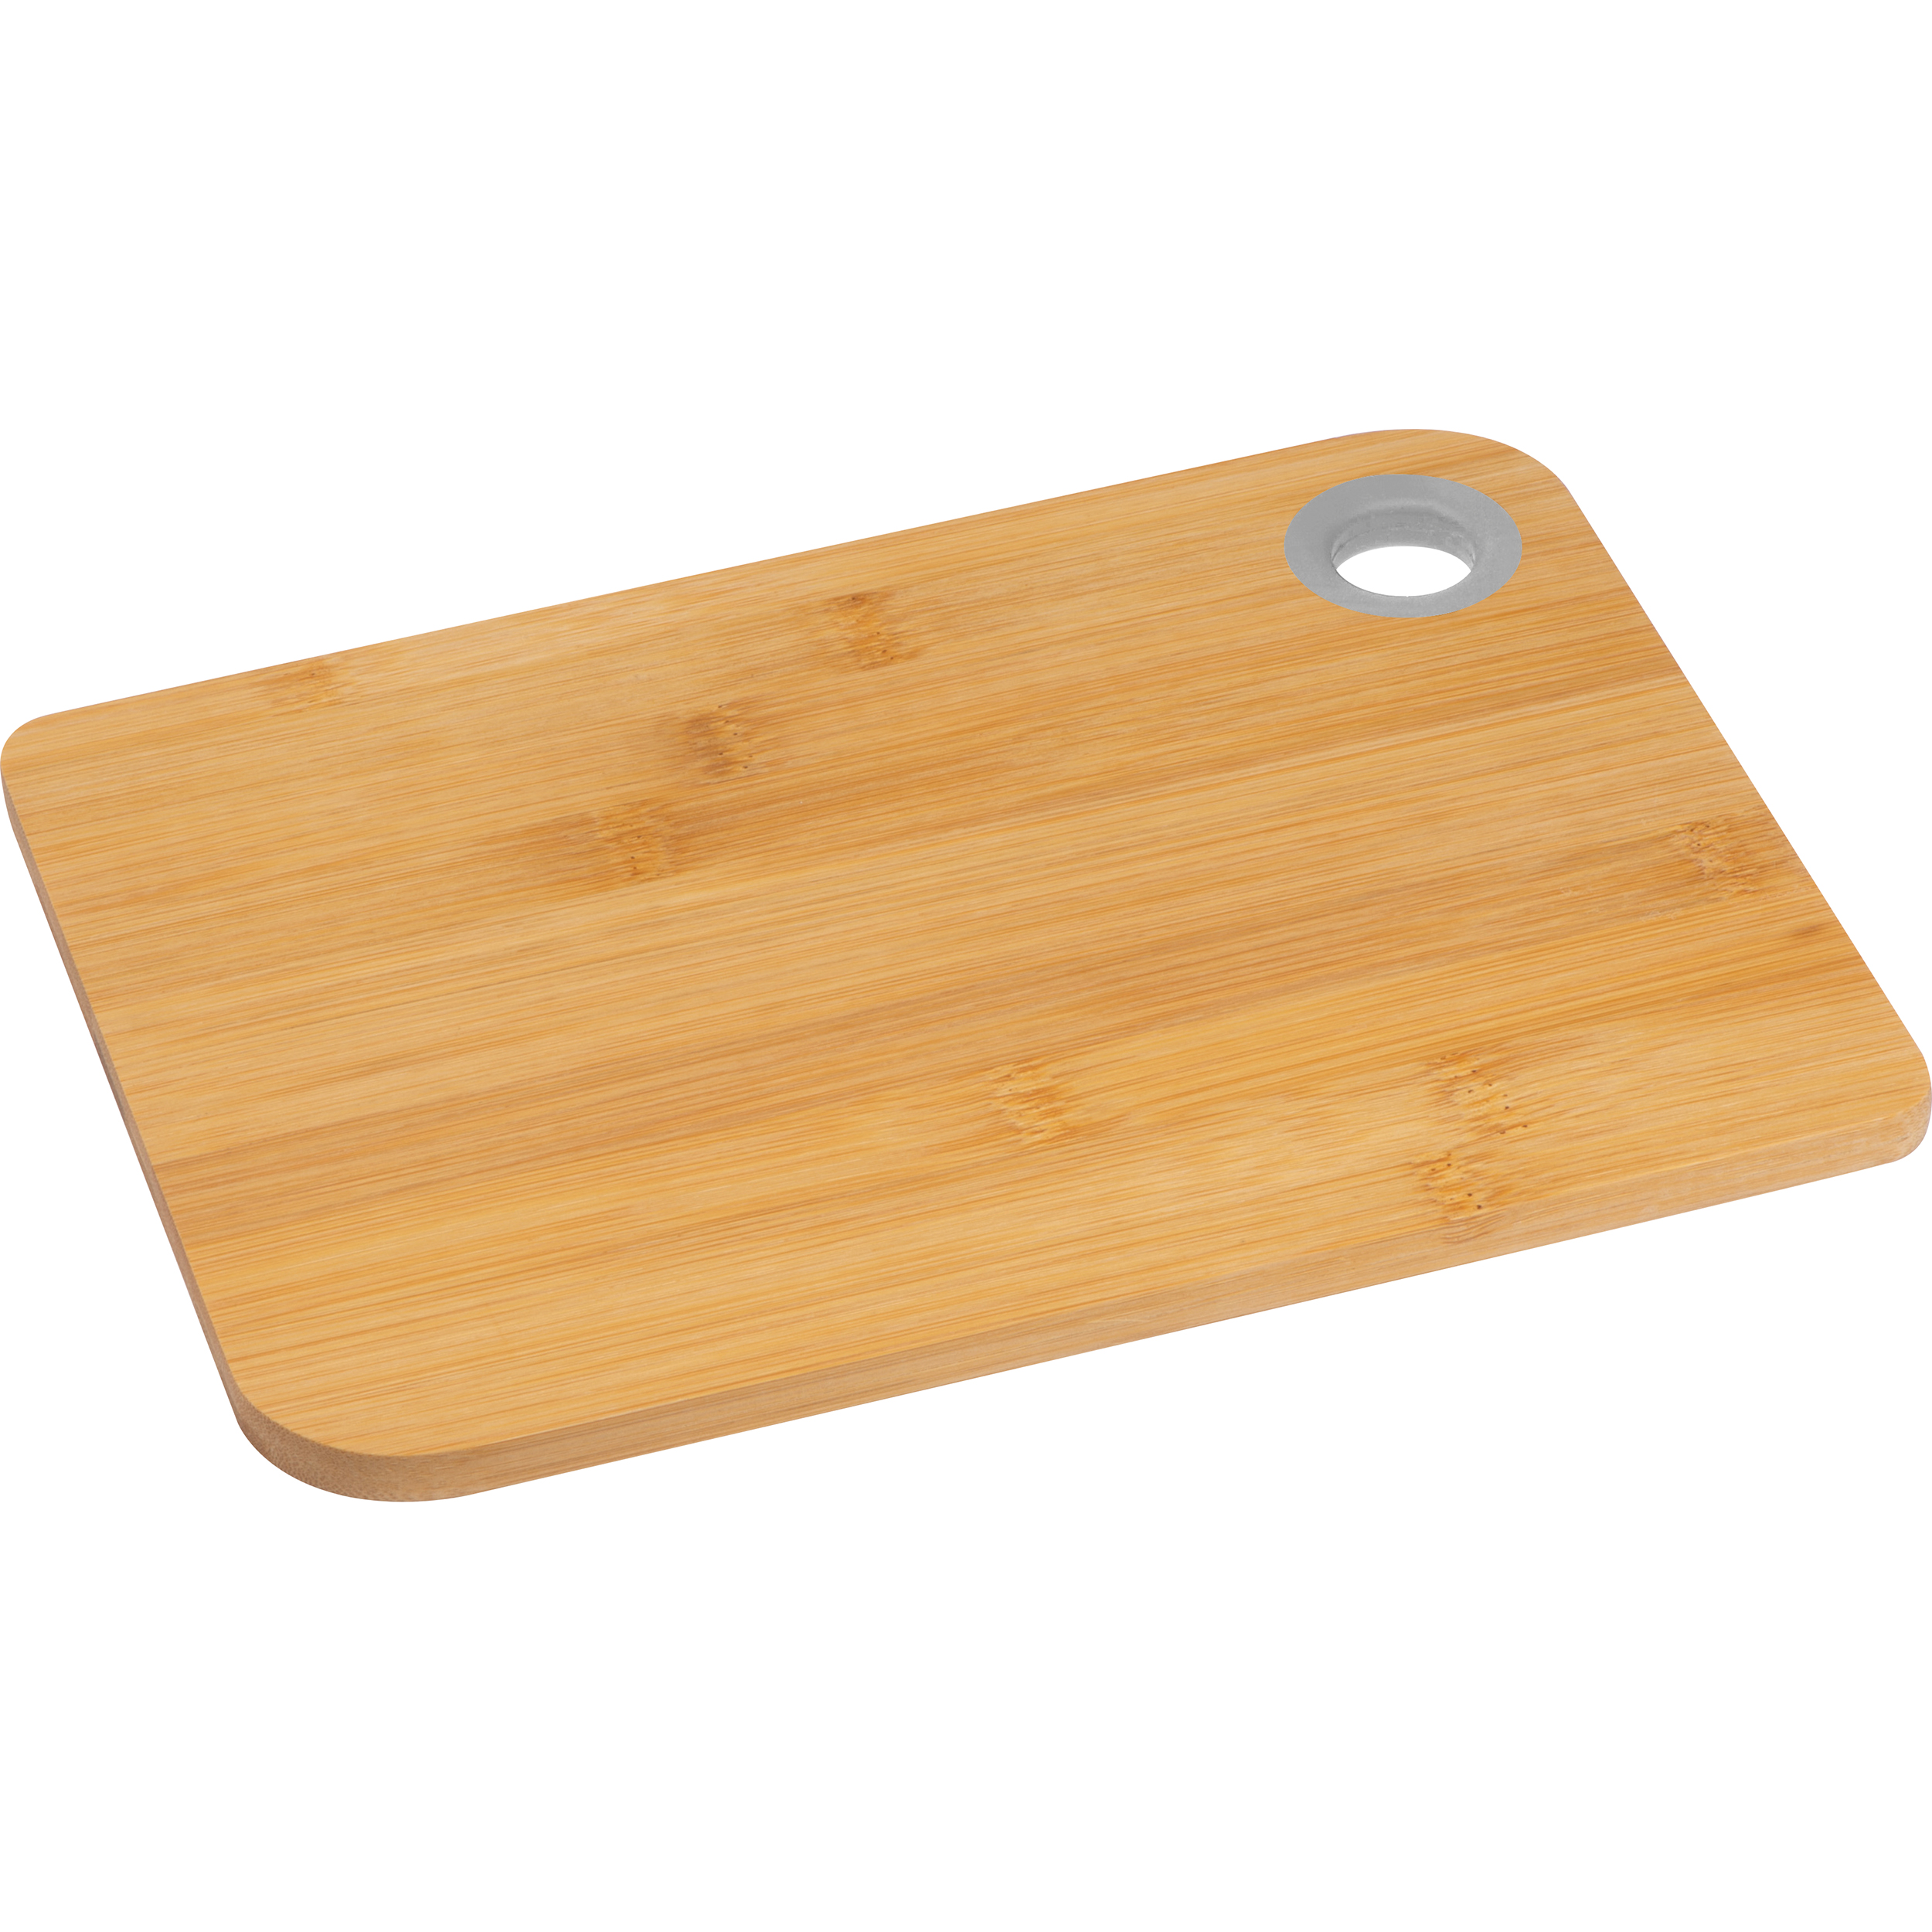 A bamboo cutting board with engraved details and a silicone ring - Inkberrow